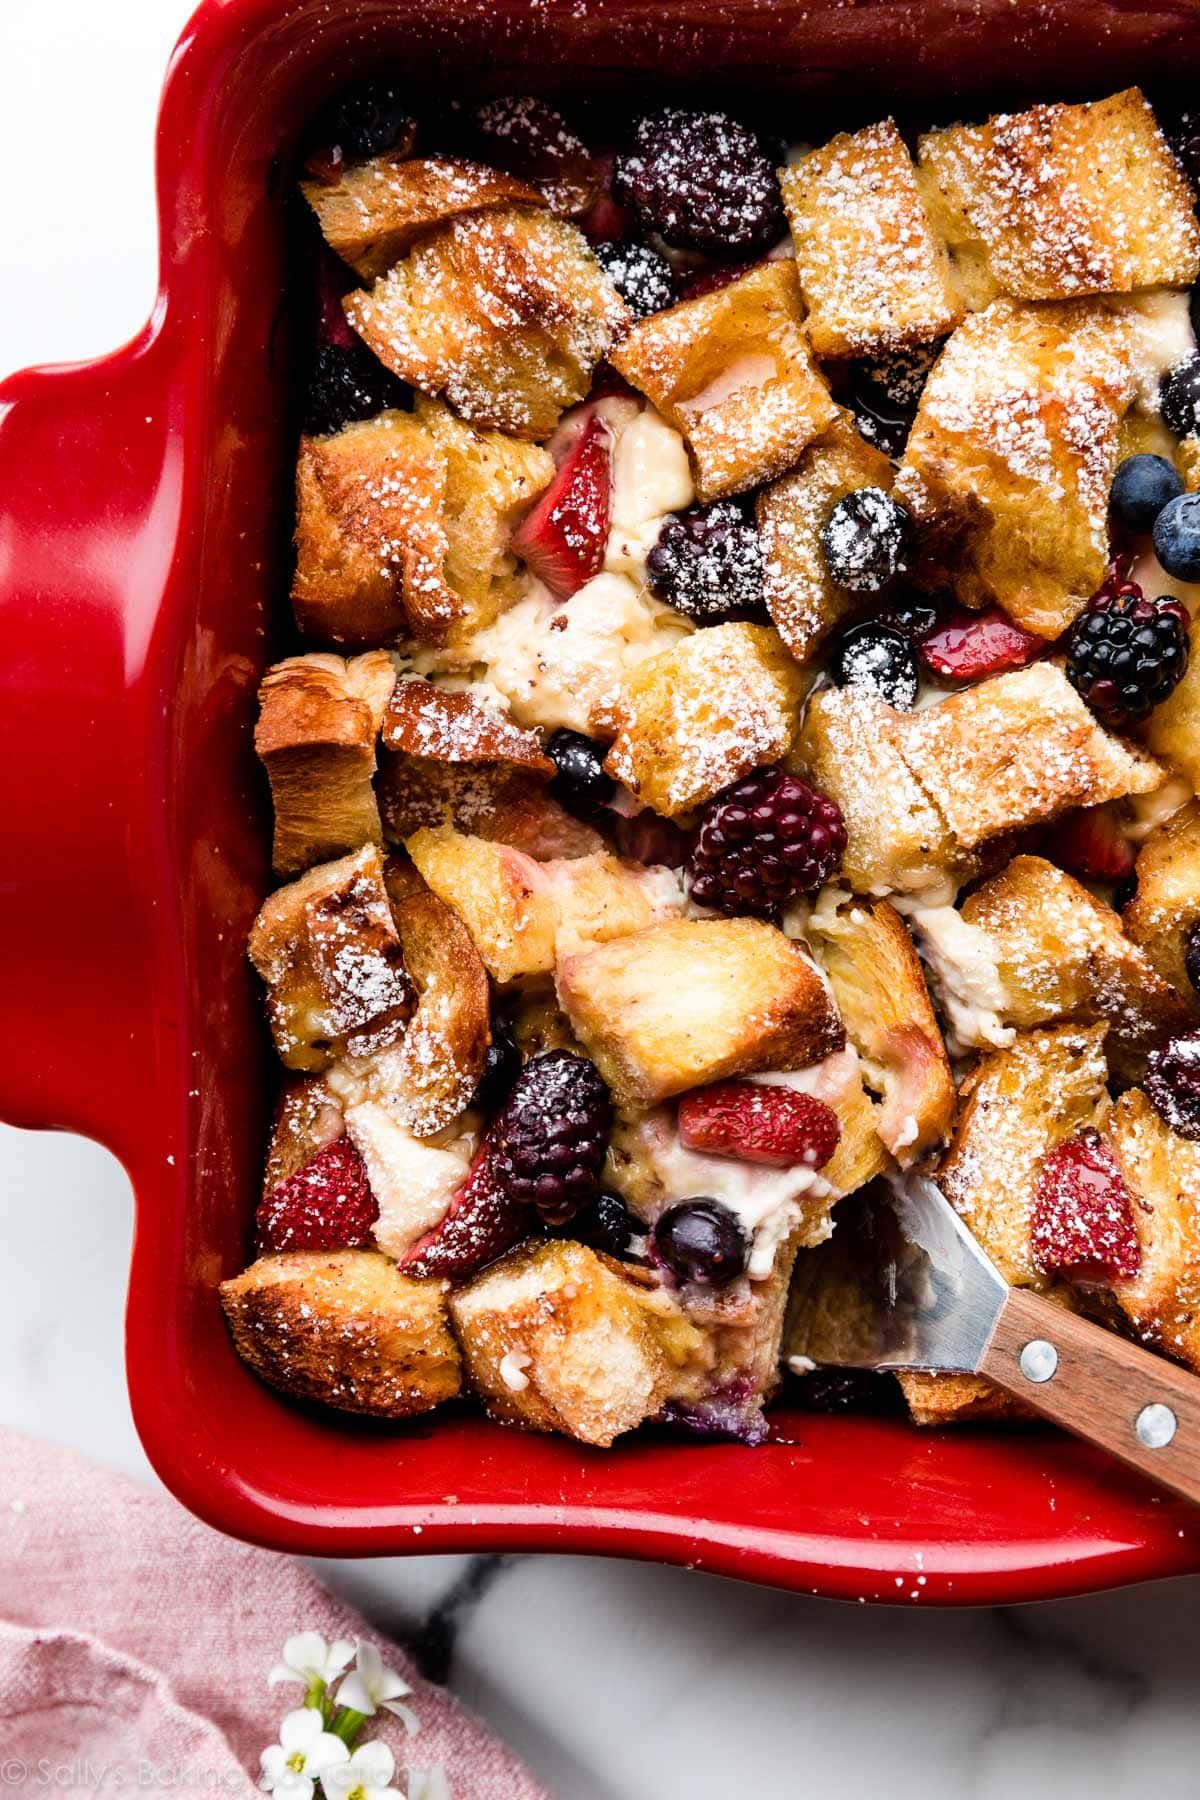 French toast casserole with berries and cream cheese baked on a red plate